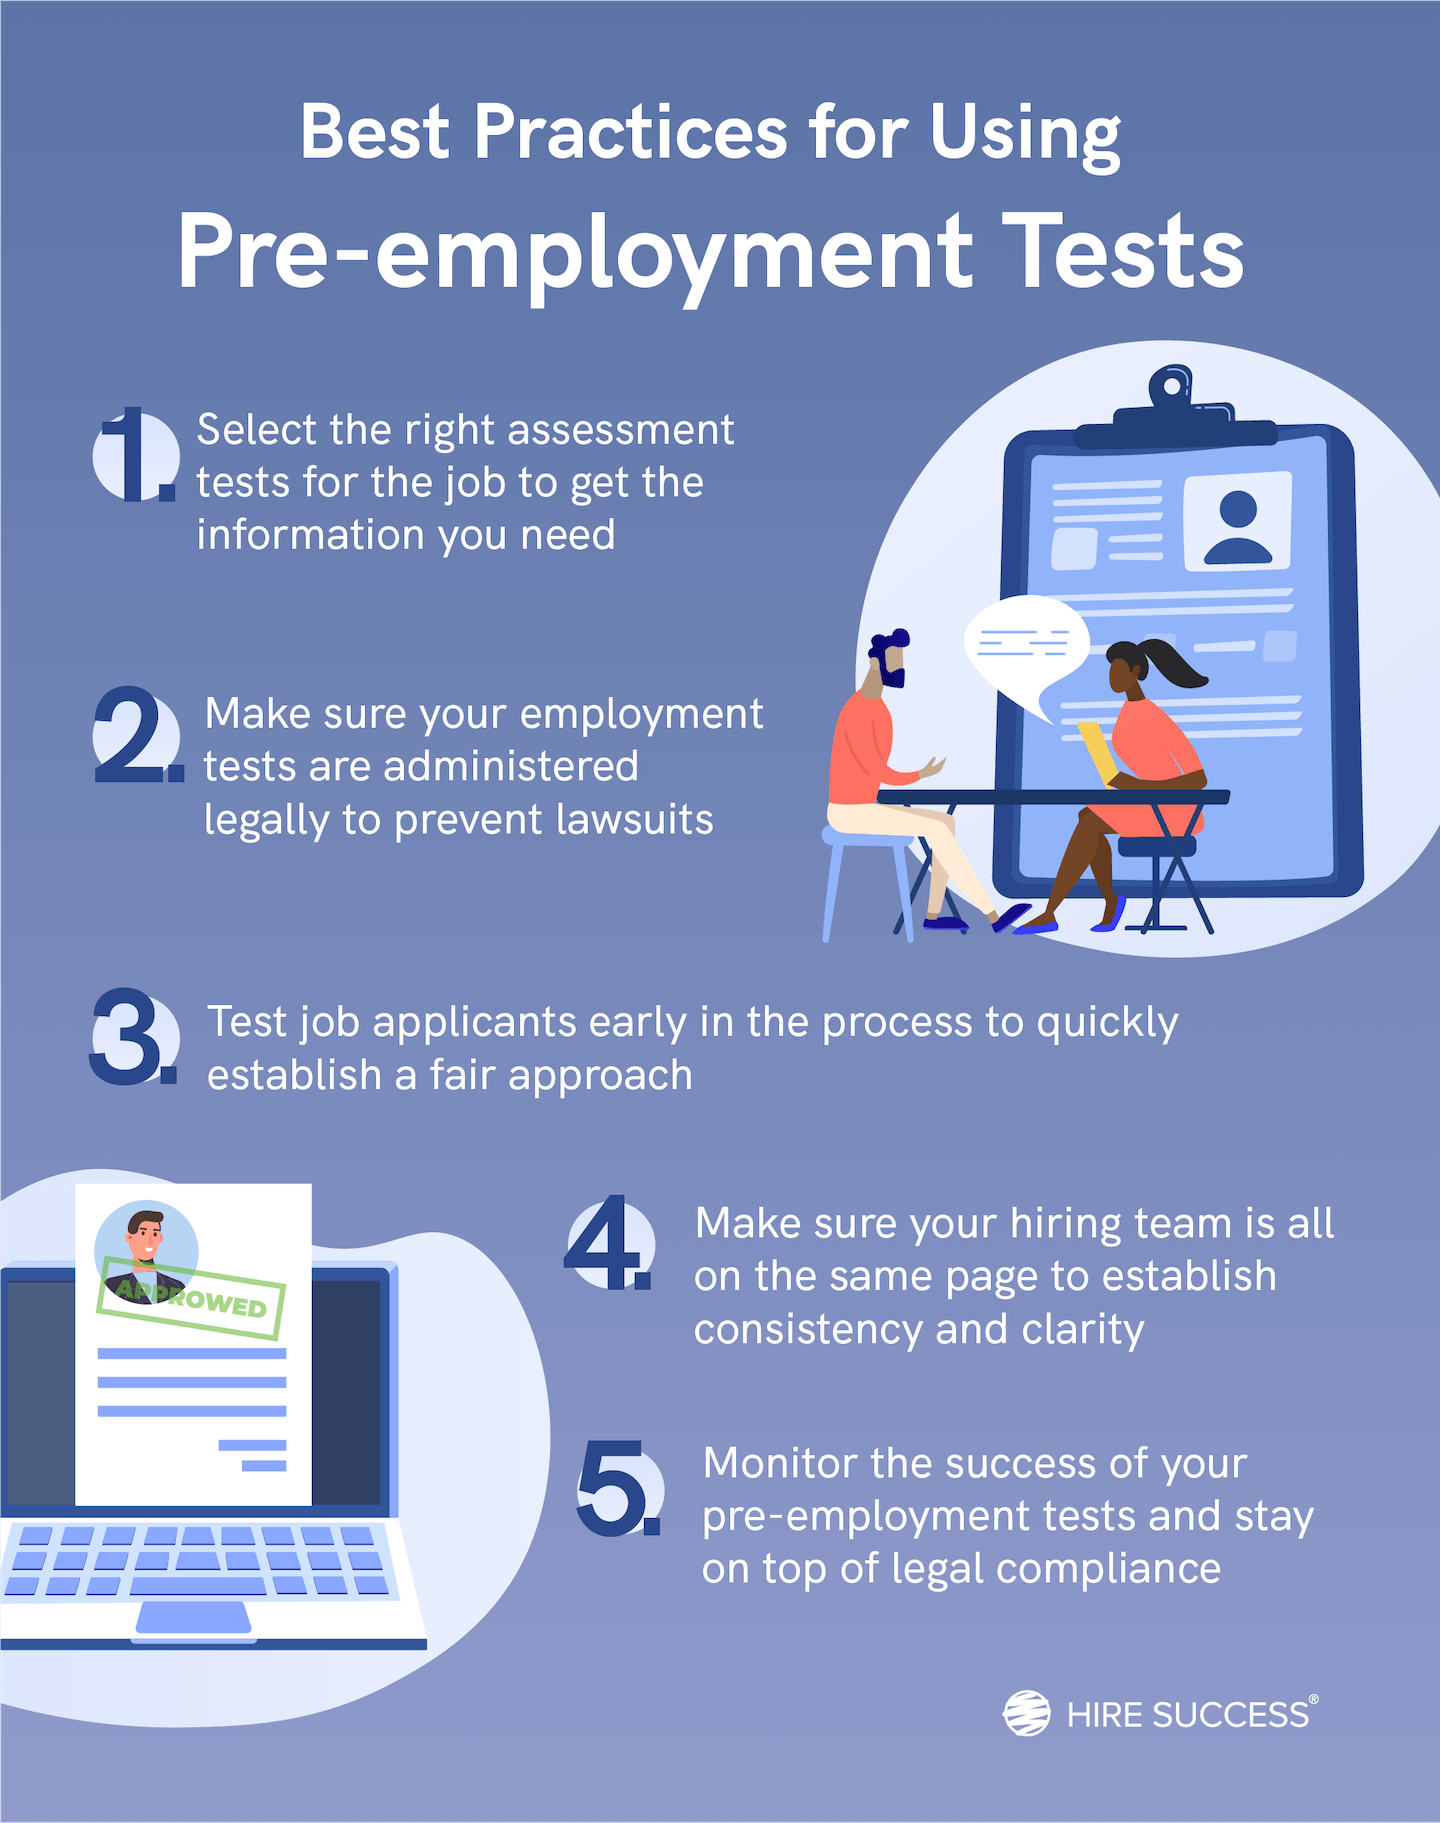 best practices for using pre-employment tests